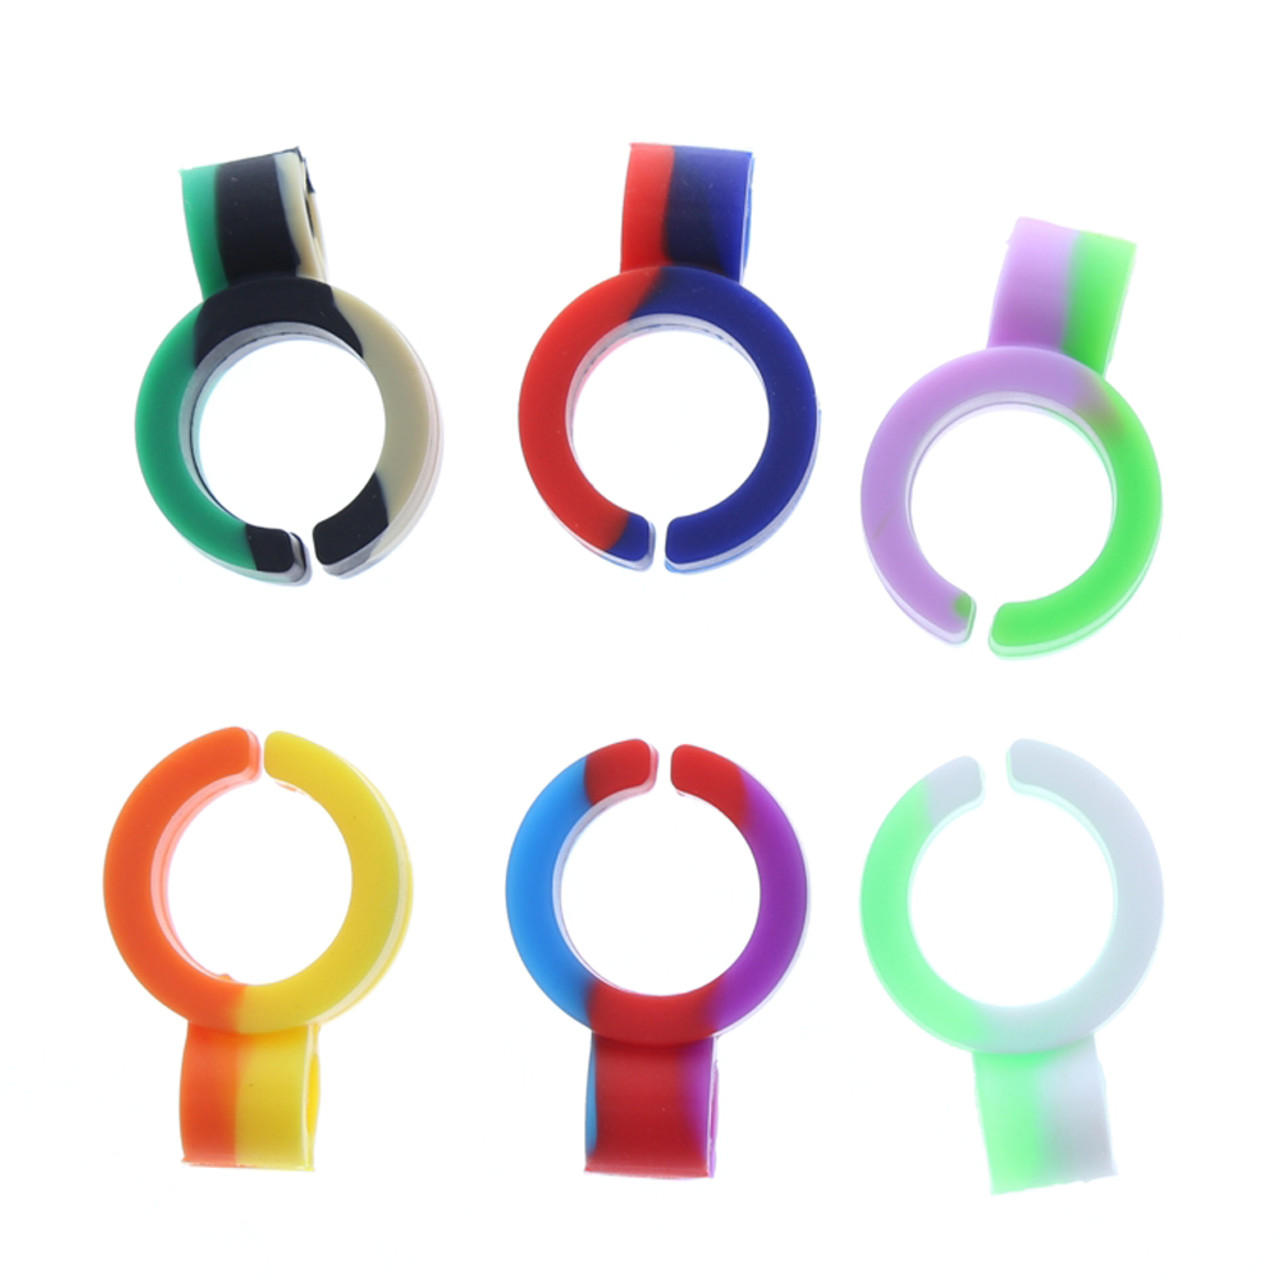 silicone joint cig blunt holder ring colors best smoke shop 2 13808.1571841453